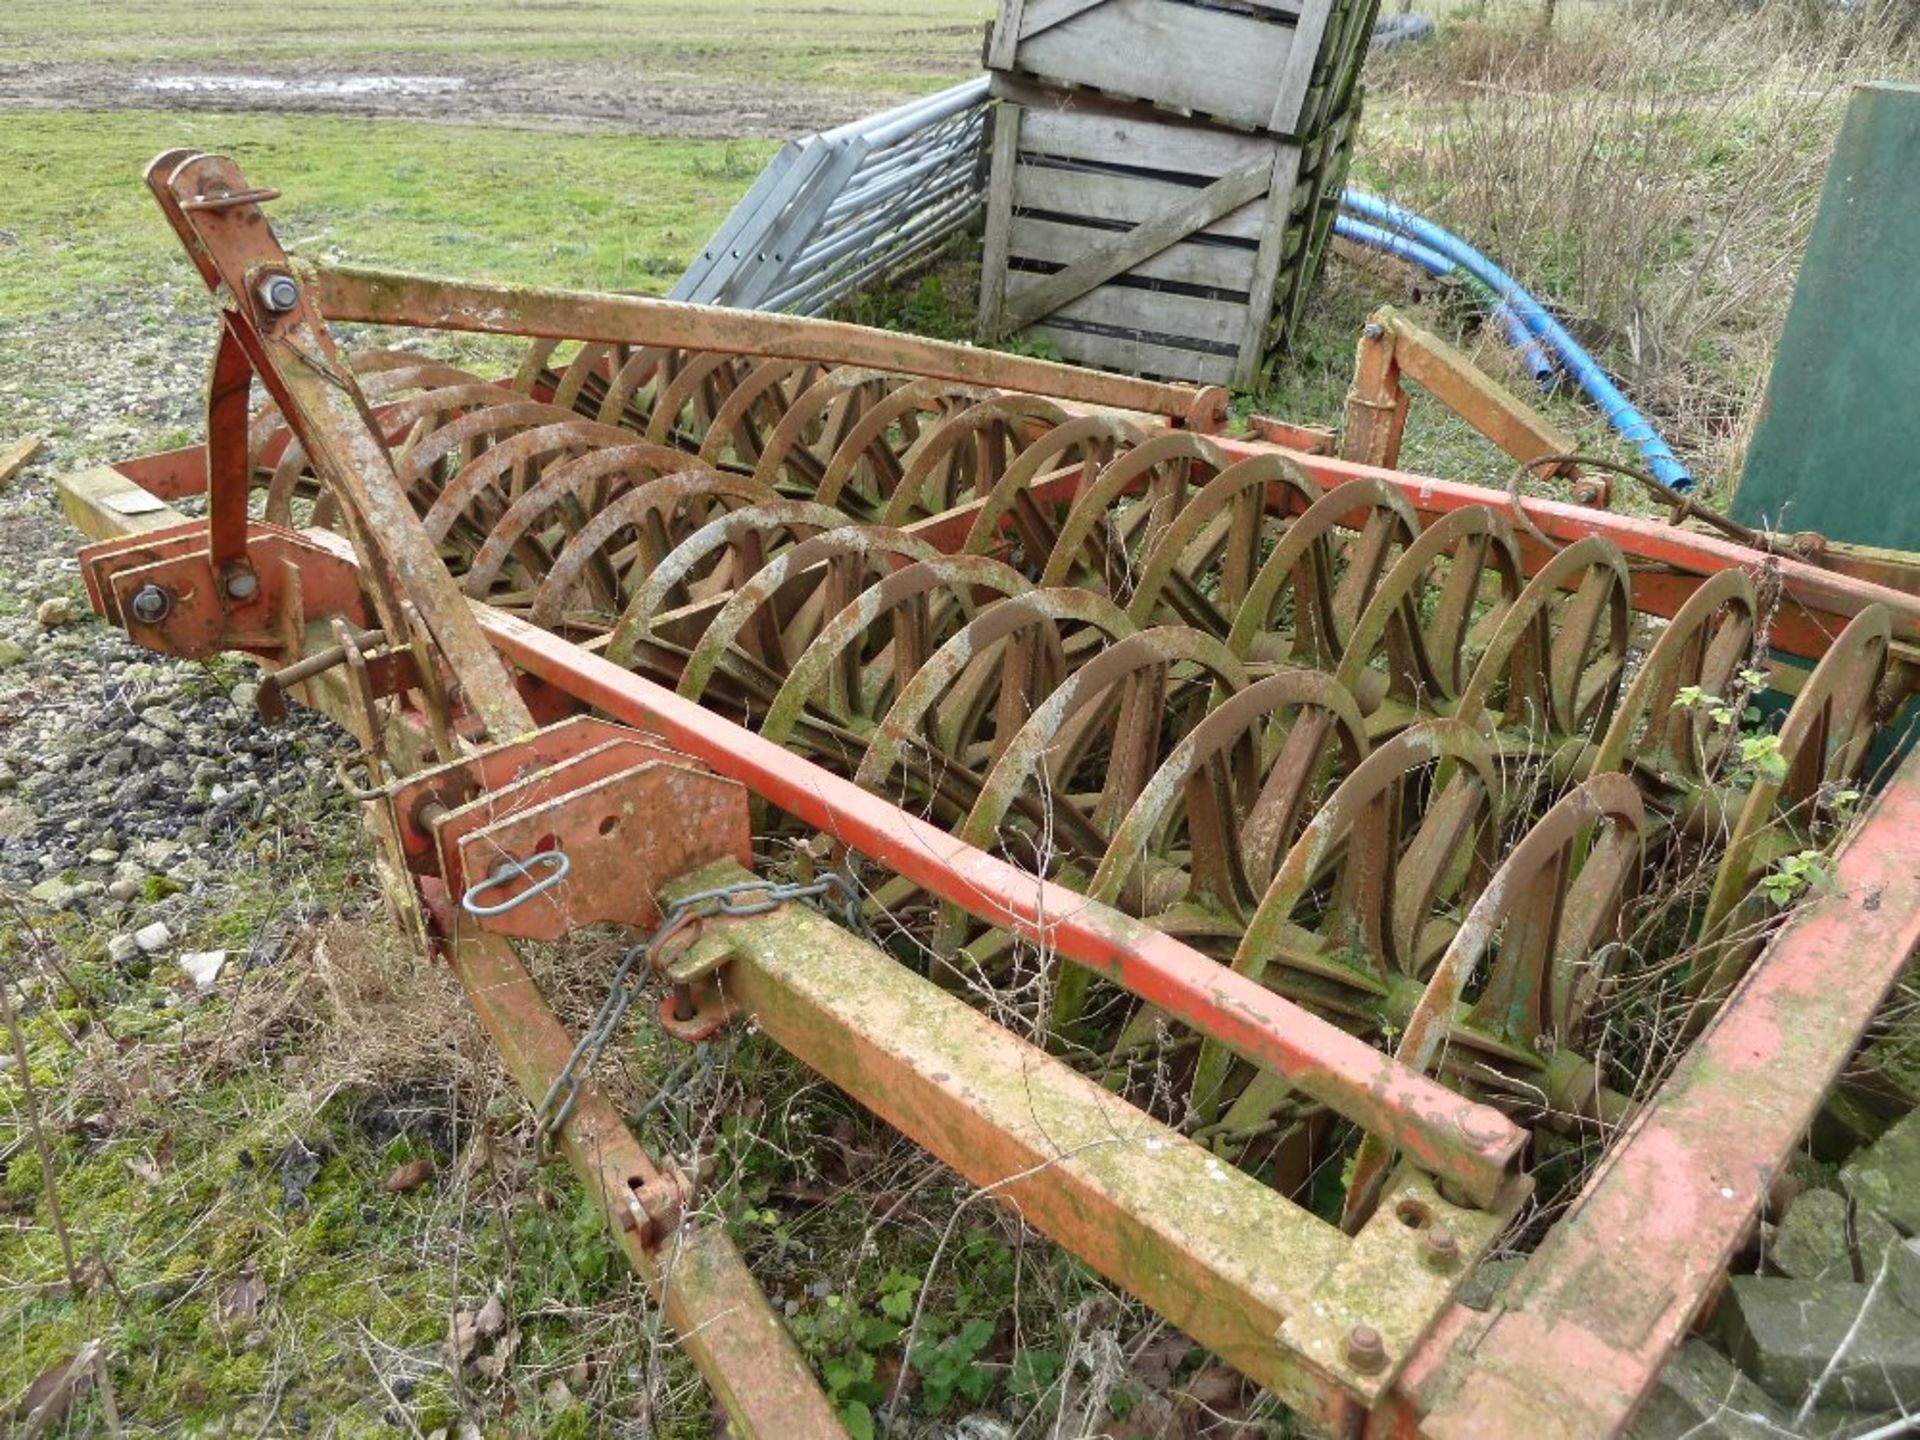 Kverneland 3m furrow press for 6 furrow plough. Comes with arm. Serial 2898/0397. - Image 2 of 2